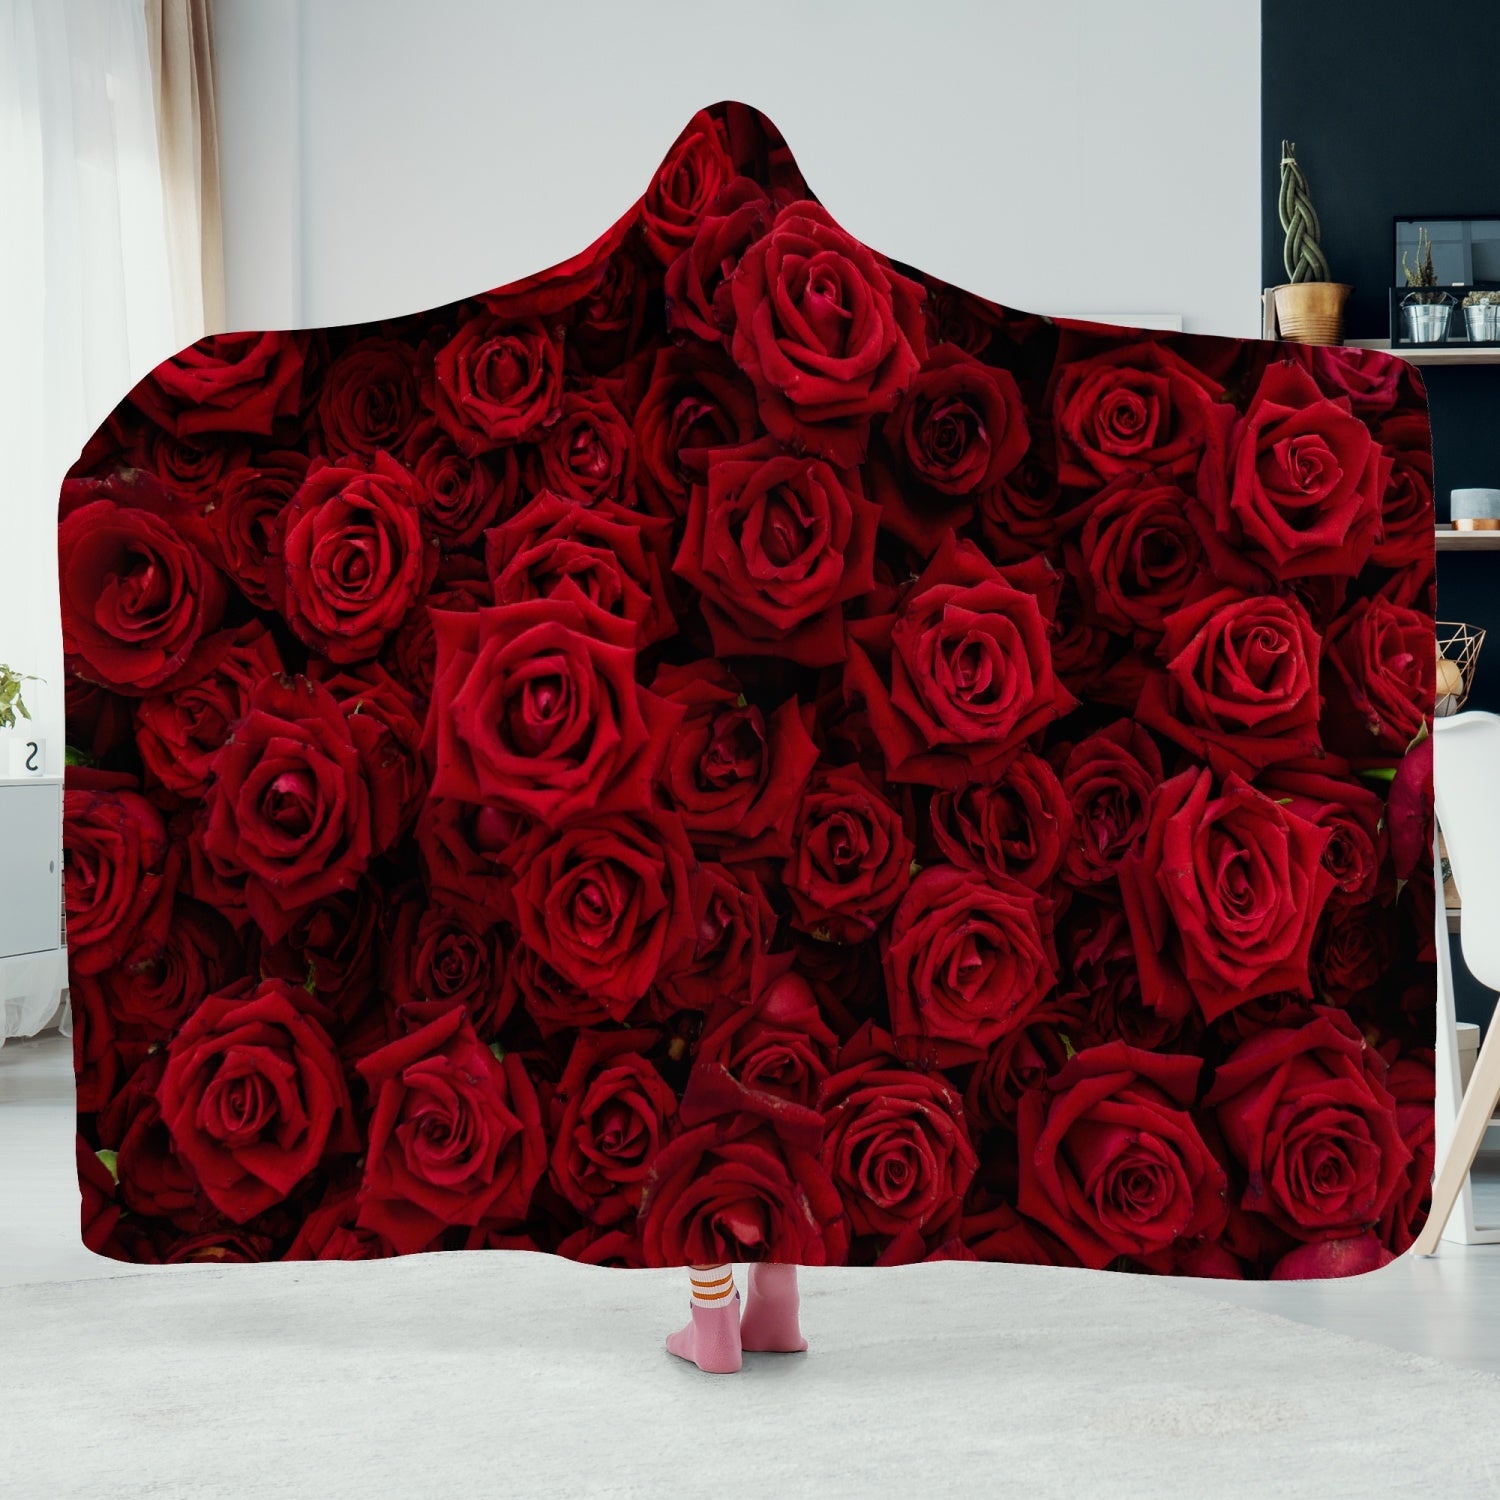 Red Roses Hooded Blanket, Flowers Sherpa Fleece Soft Fluffy Warm Adult Men Women Kids Large Wearable Hood Valentine's Day Gift Starcove Fashion